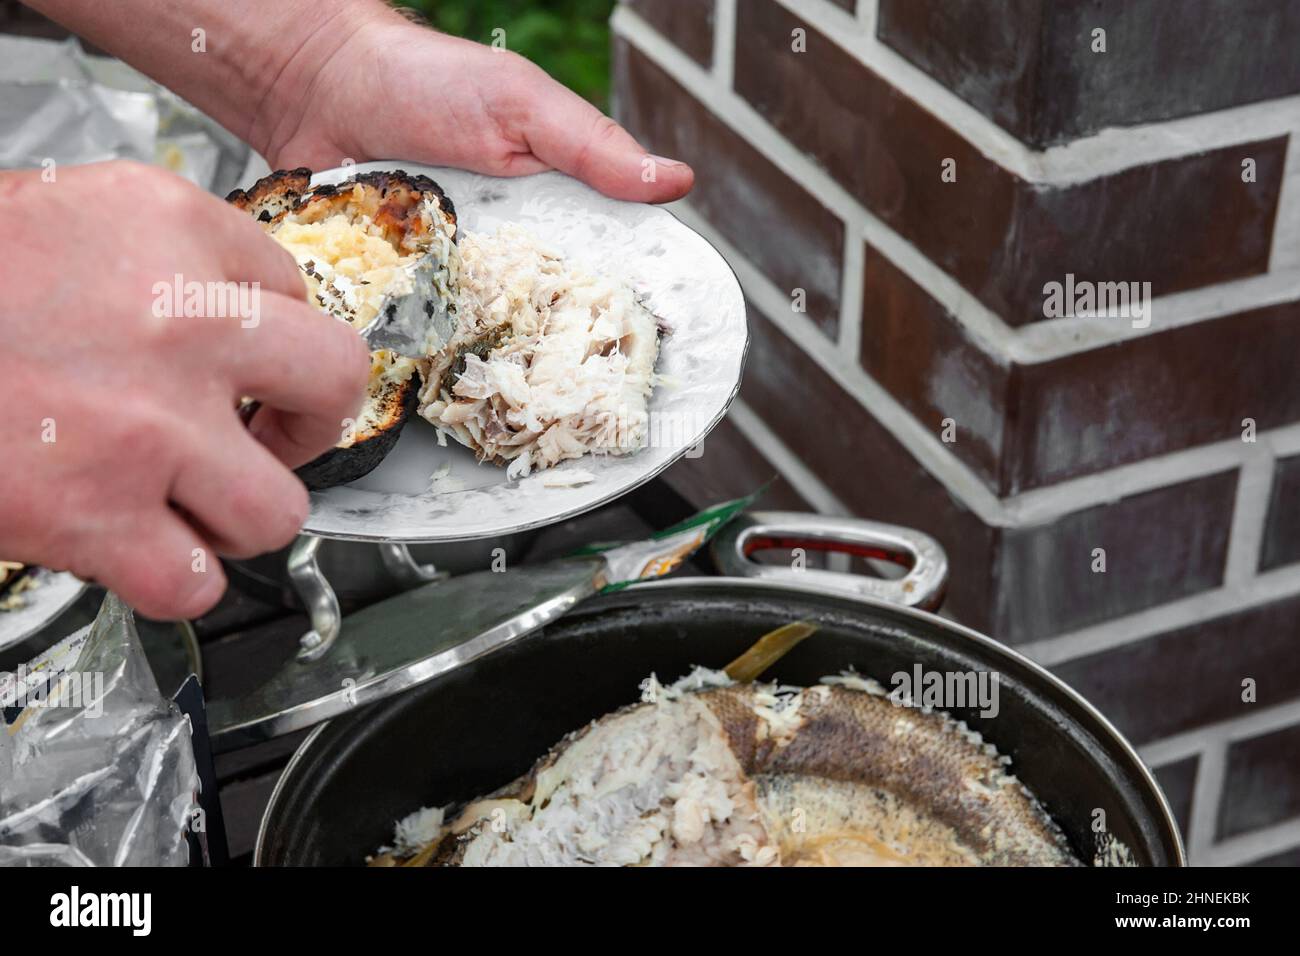 https://c8.alamy.com/comp/2HNEKBK/cooking-white-fish-in-cream-fish-stewed-in-cream-is-prepared-for-a-picnic-in-nature-2HNEKBK.jpg